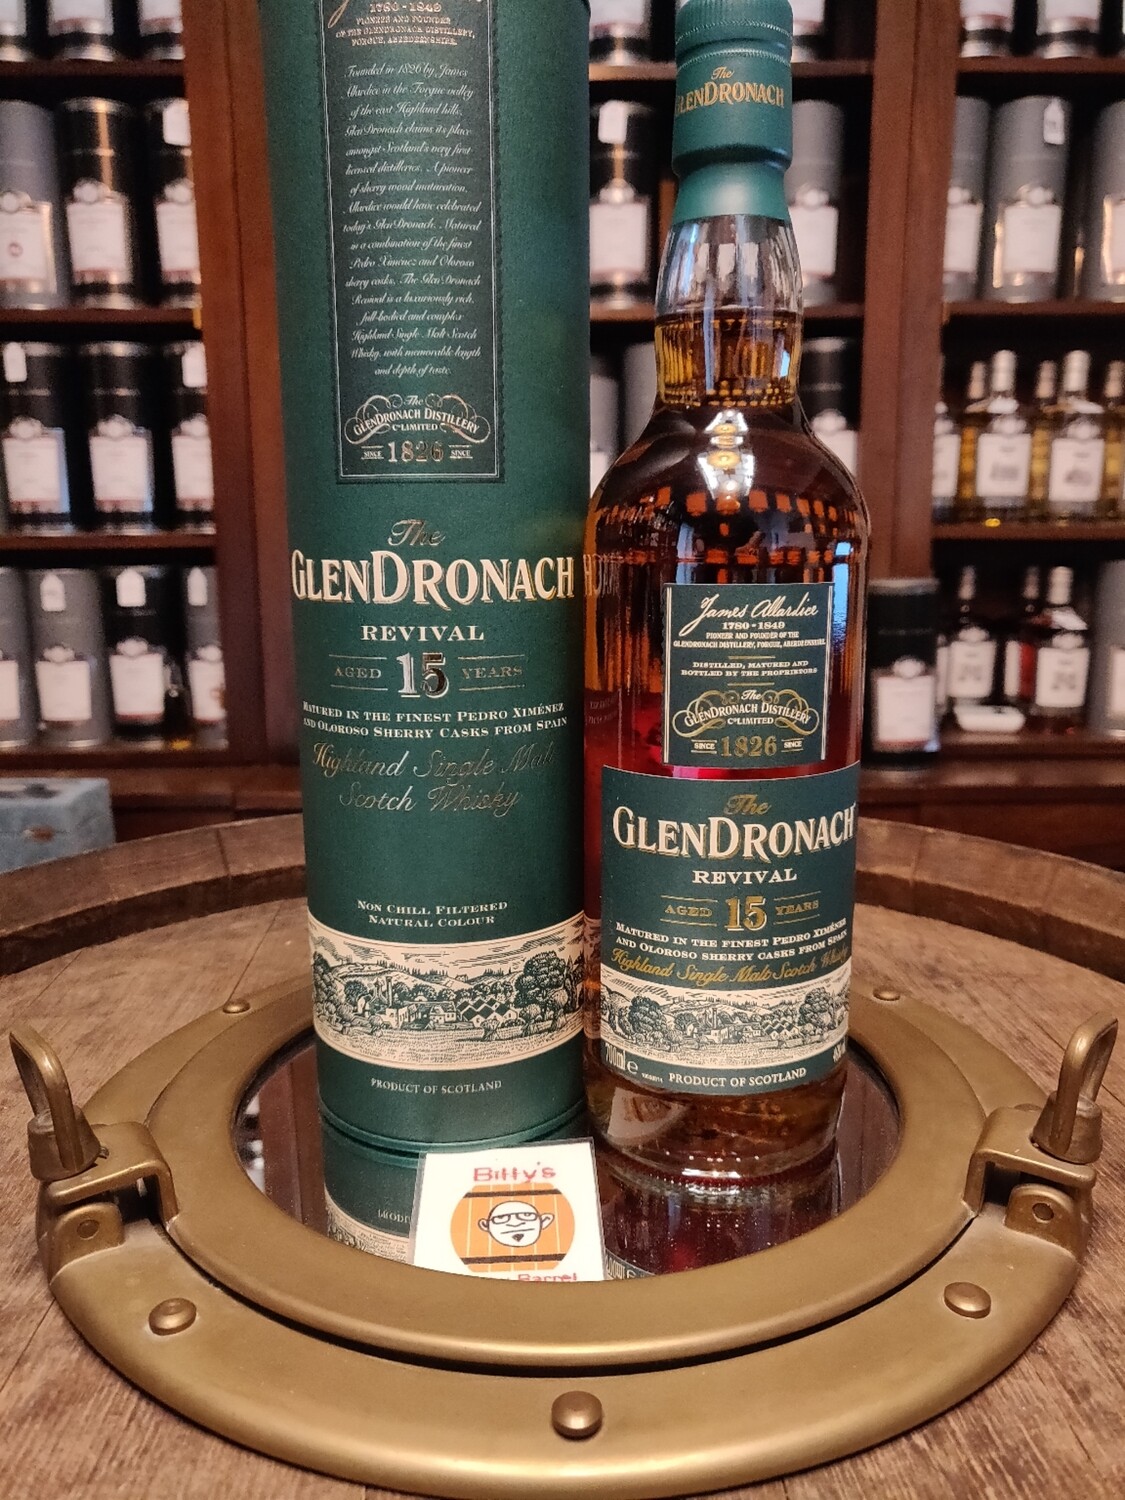 Glendronach 15 years old Revival